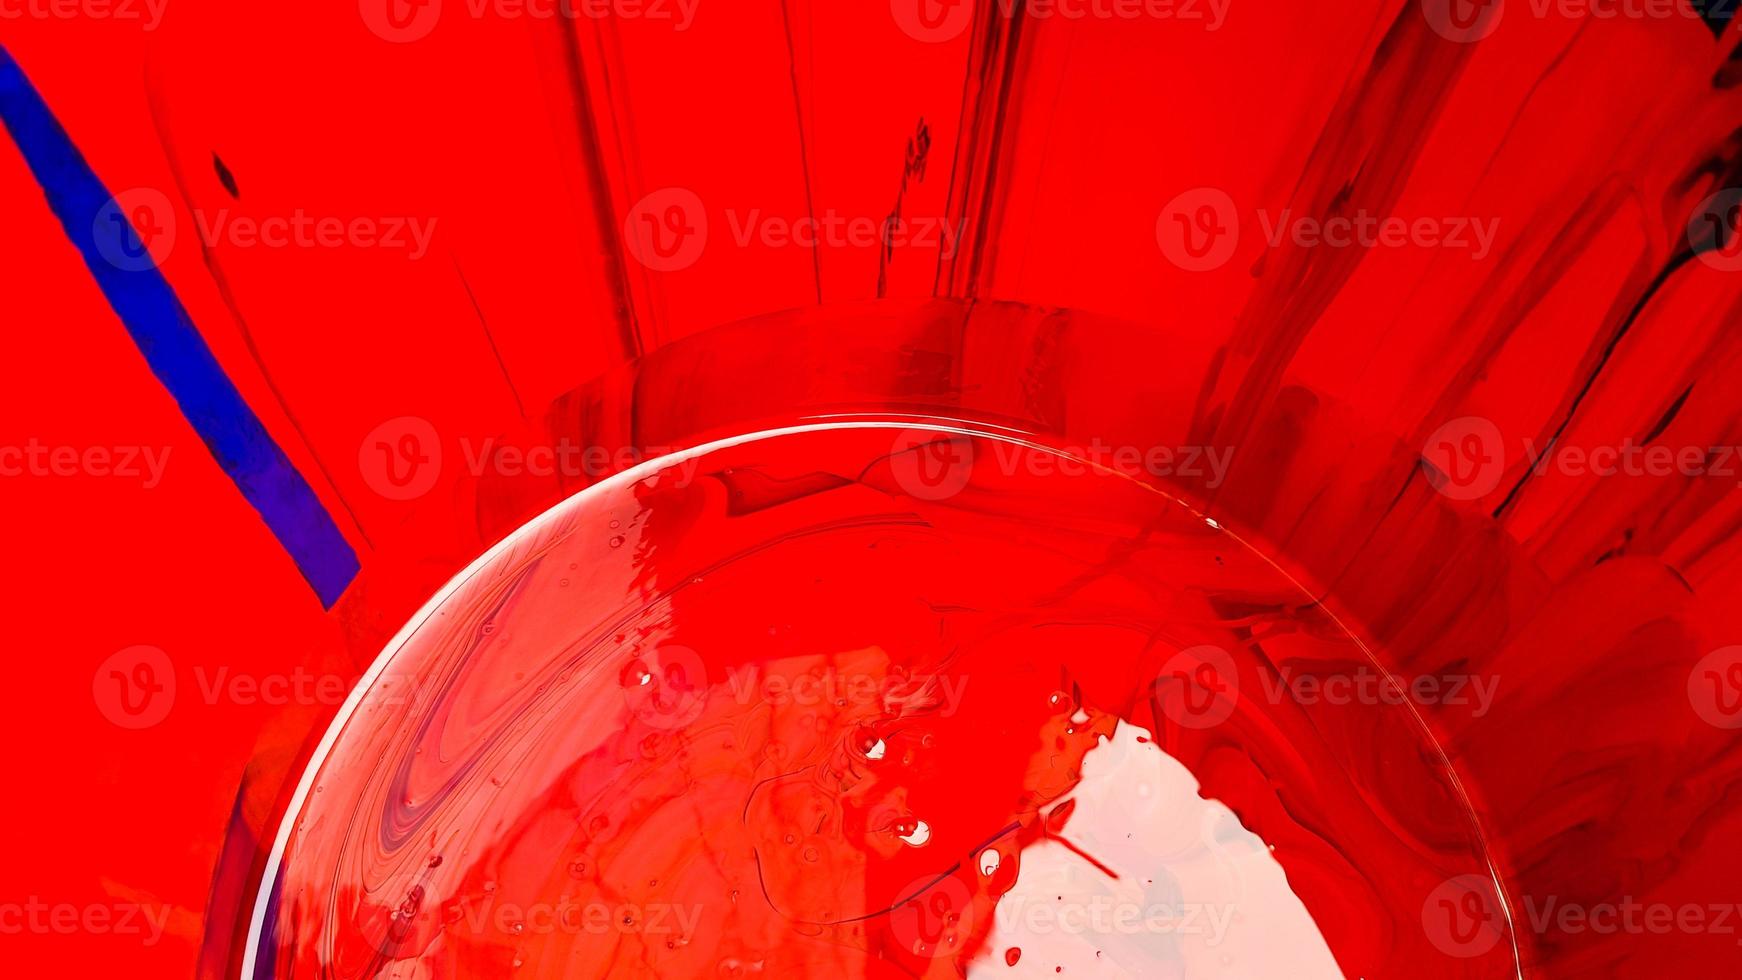 Abstract background of spilled red paint with buckets on a black backdrop. Red paint is pouring on a black background. Use it for an artist or creative concept. paints spilled red colored background photo